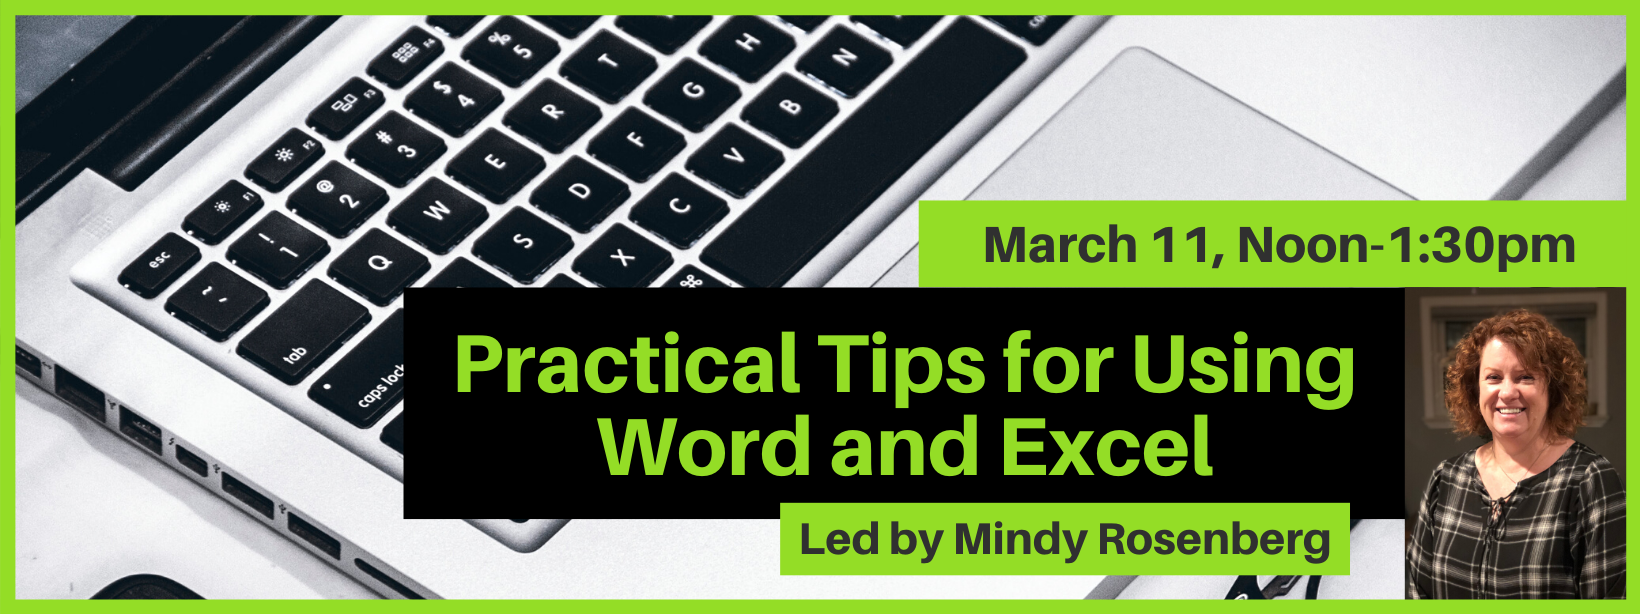 Practical Tips for Using Word and Excel